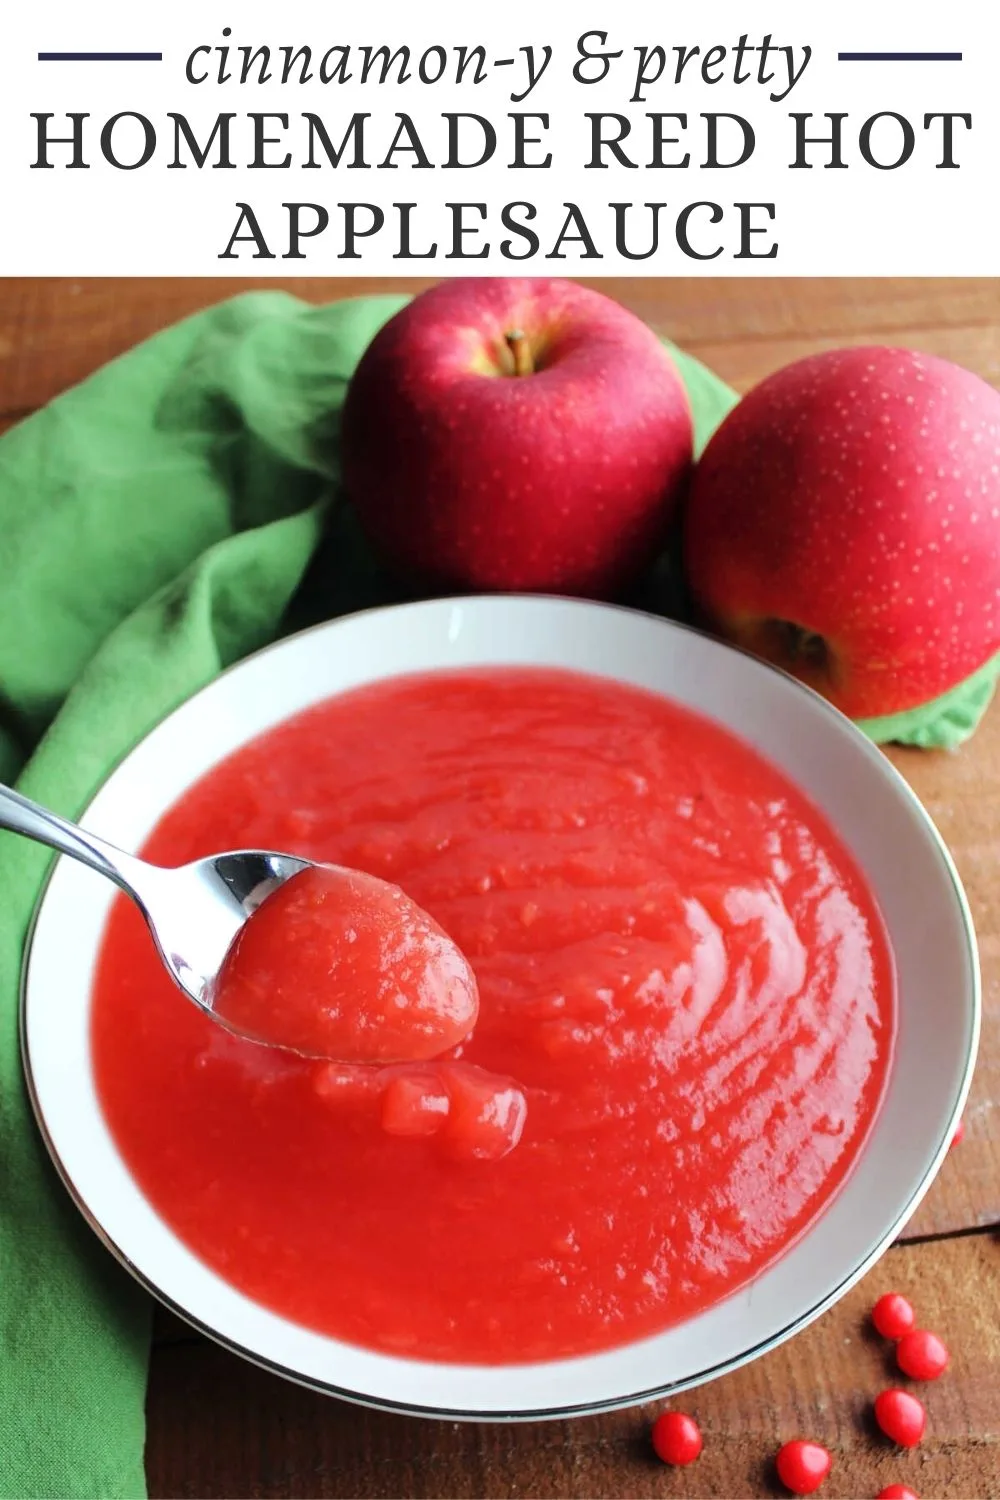 Rosy applesauce gets both it's red color and a fun cinnamon flavor from red hots. This twist on a vintage recipe is a fun way to turn fresh apples into a delicious and vibrant homemade applesauce.